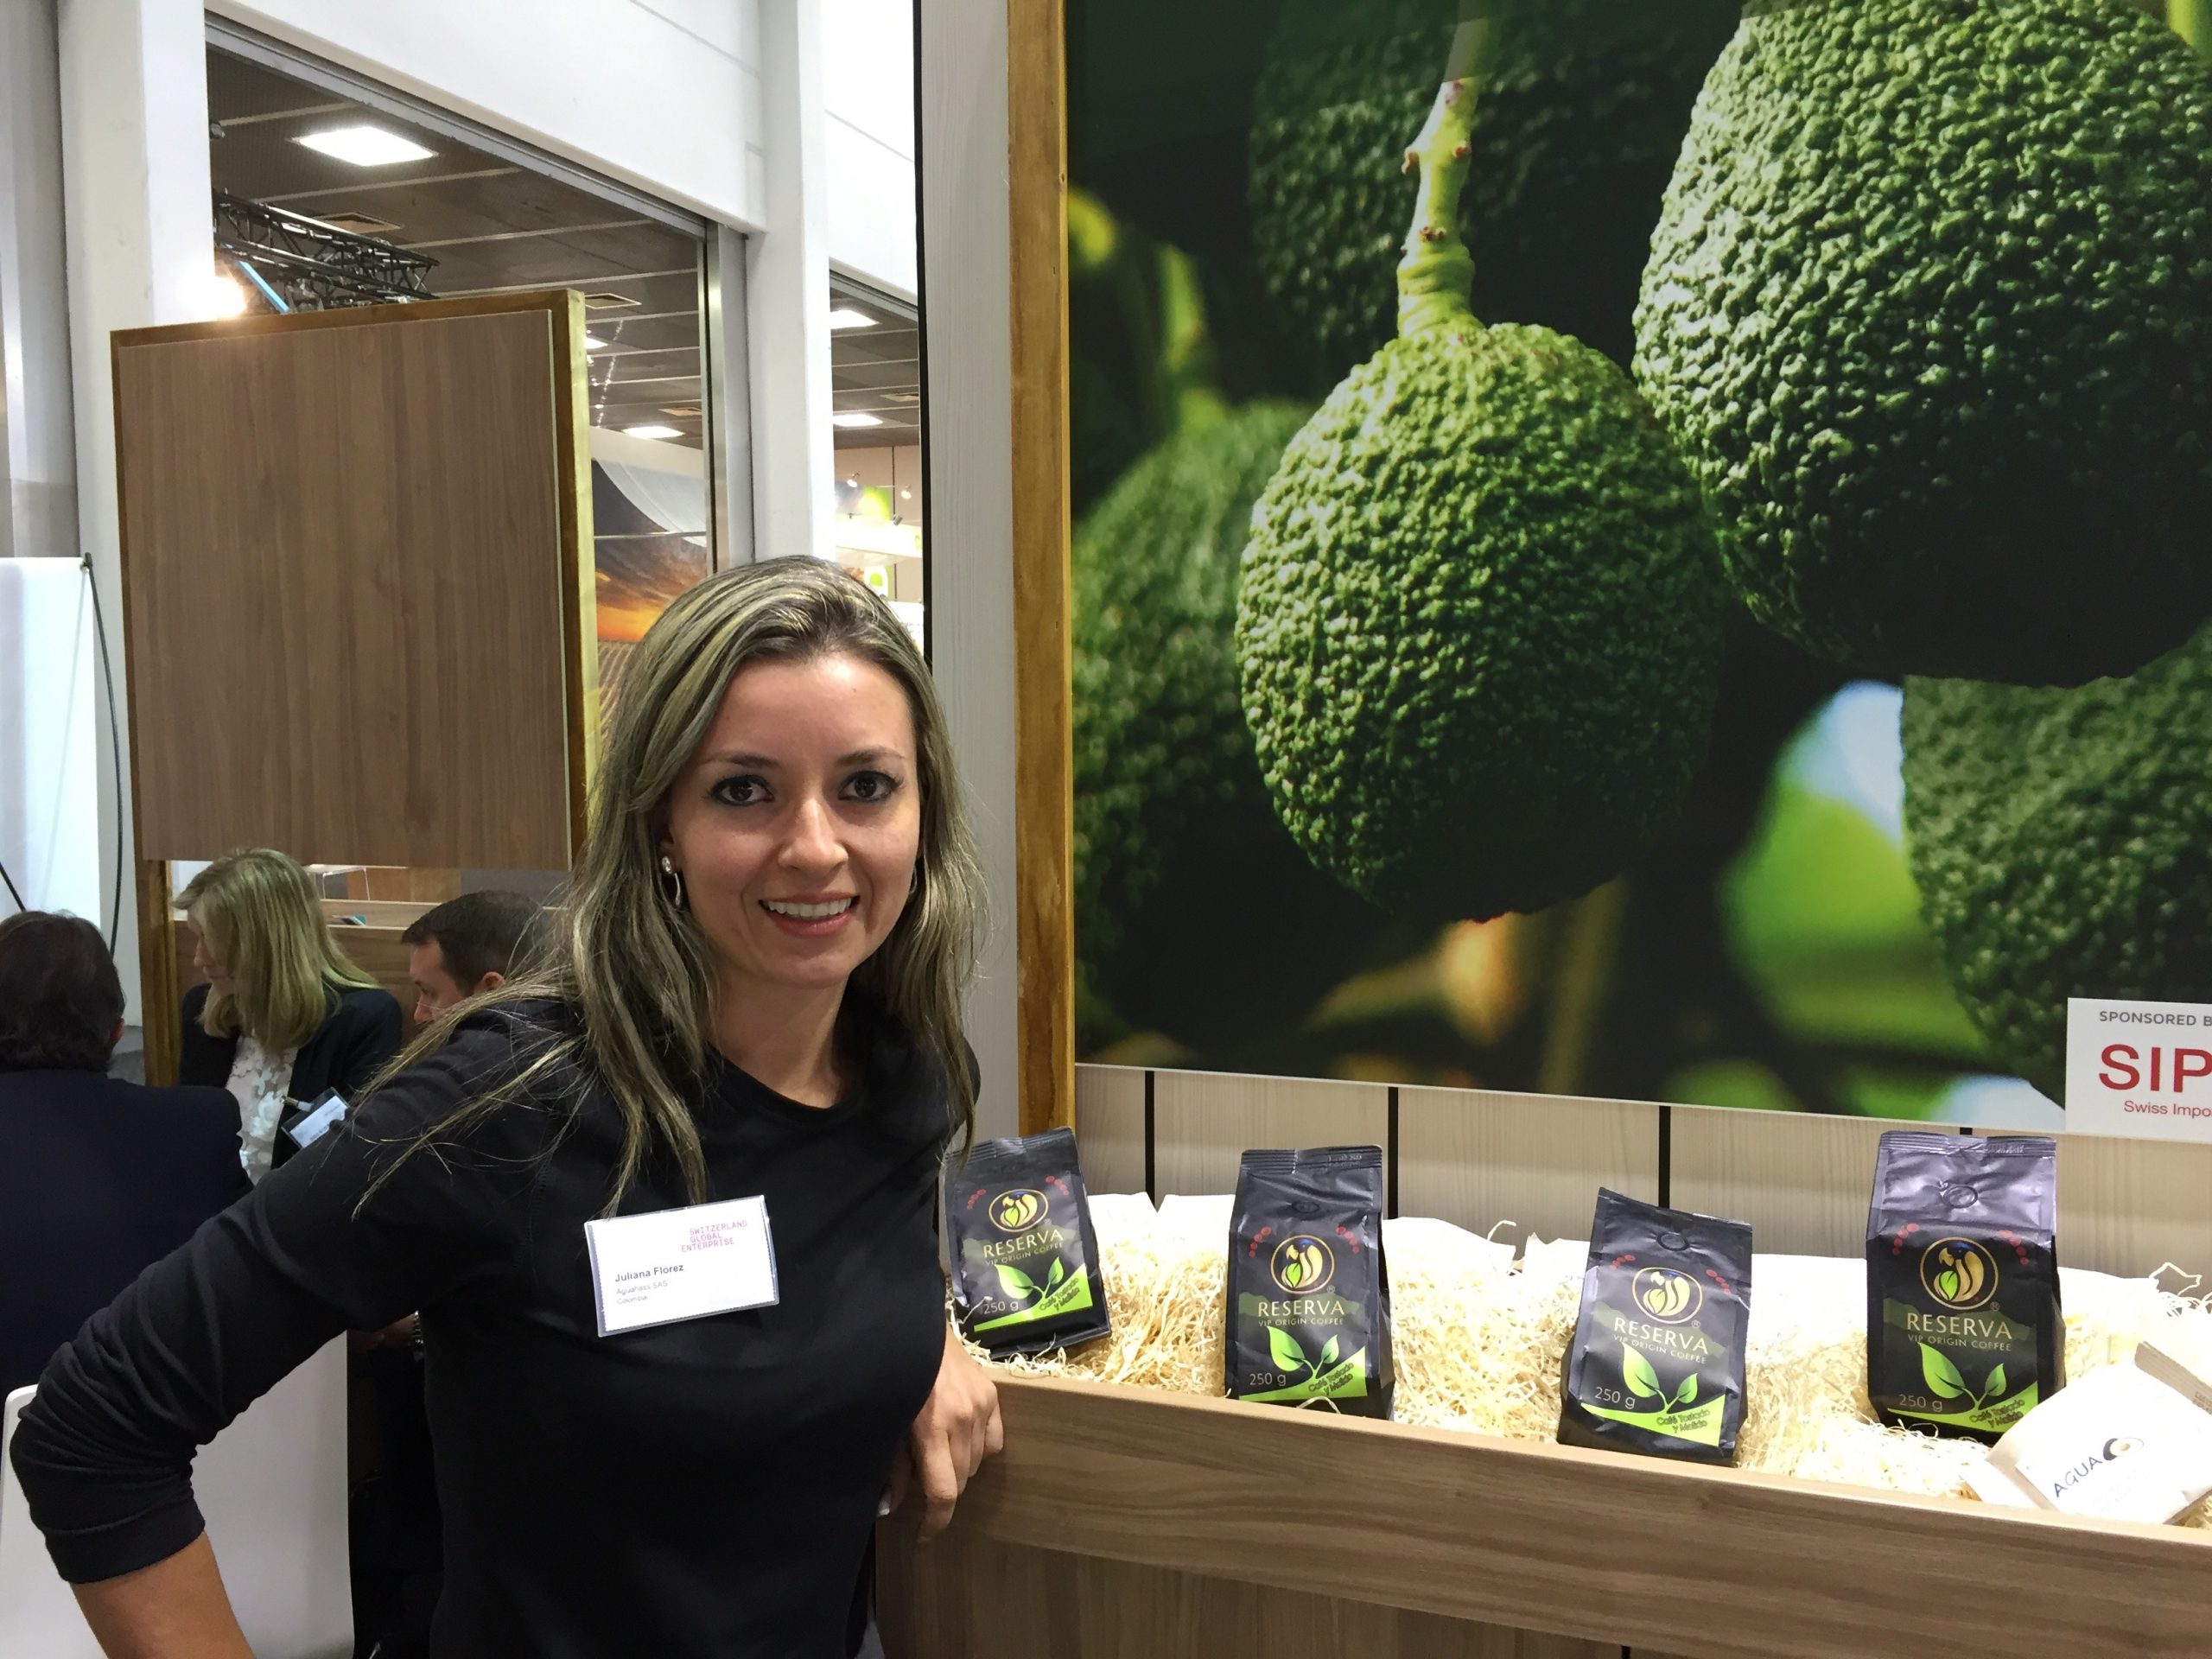 Aguahass is a young Colombian company whose own fields of Hass avocado are going into their fifth year of production. The firm is now ready and able to start exporting 100% directly.